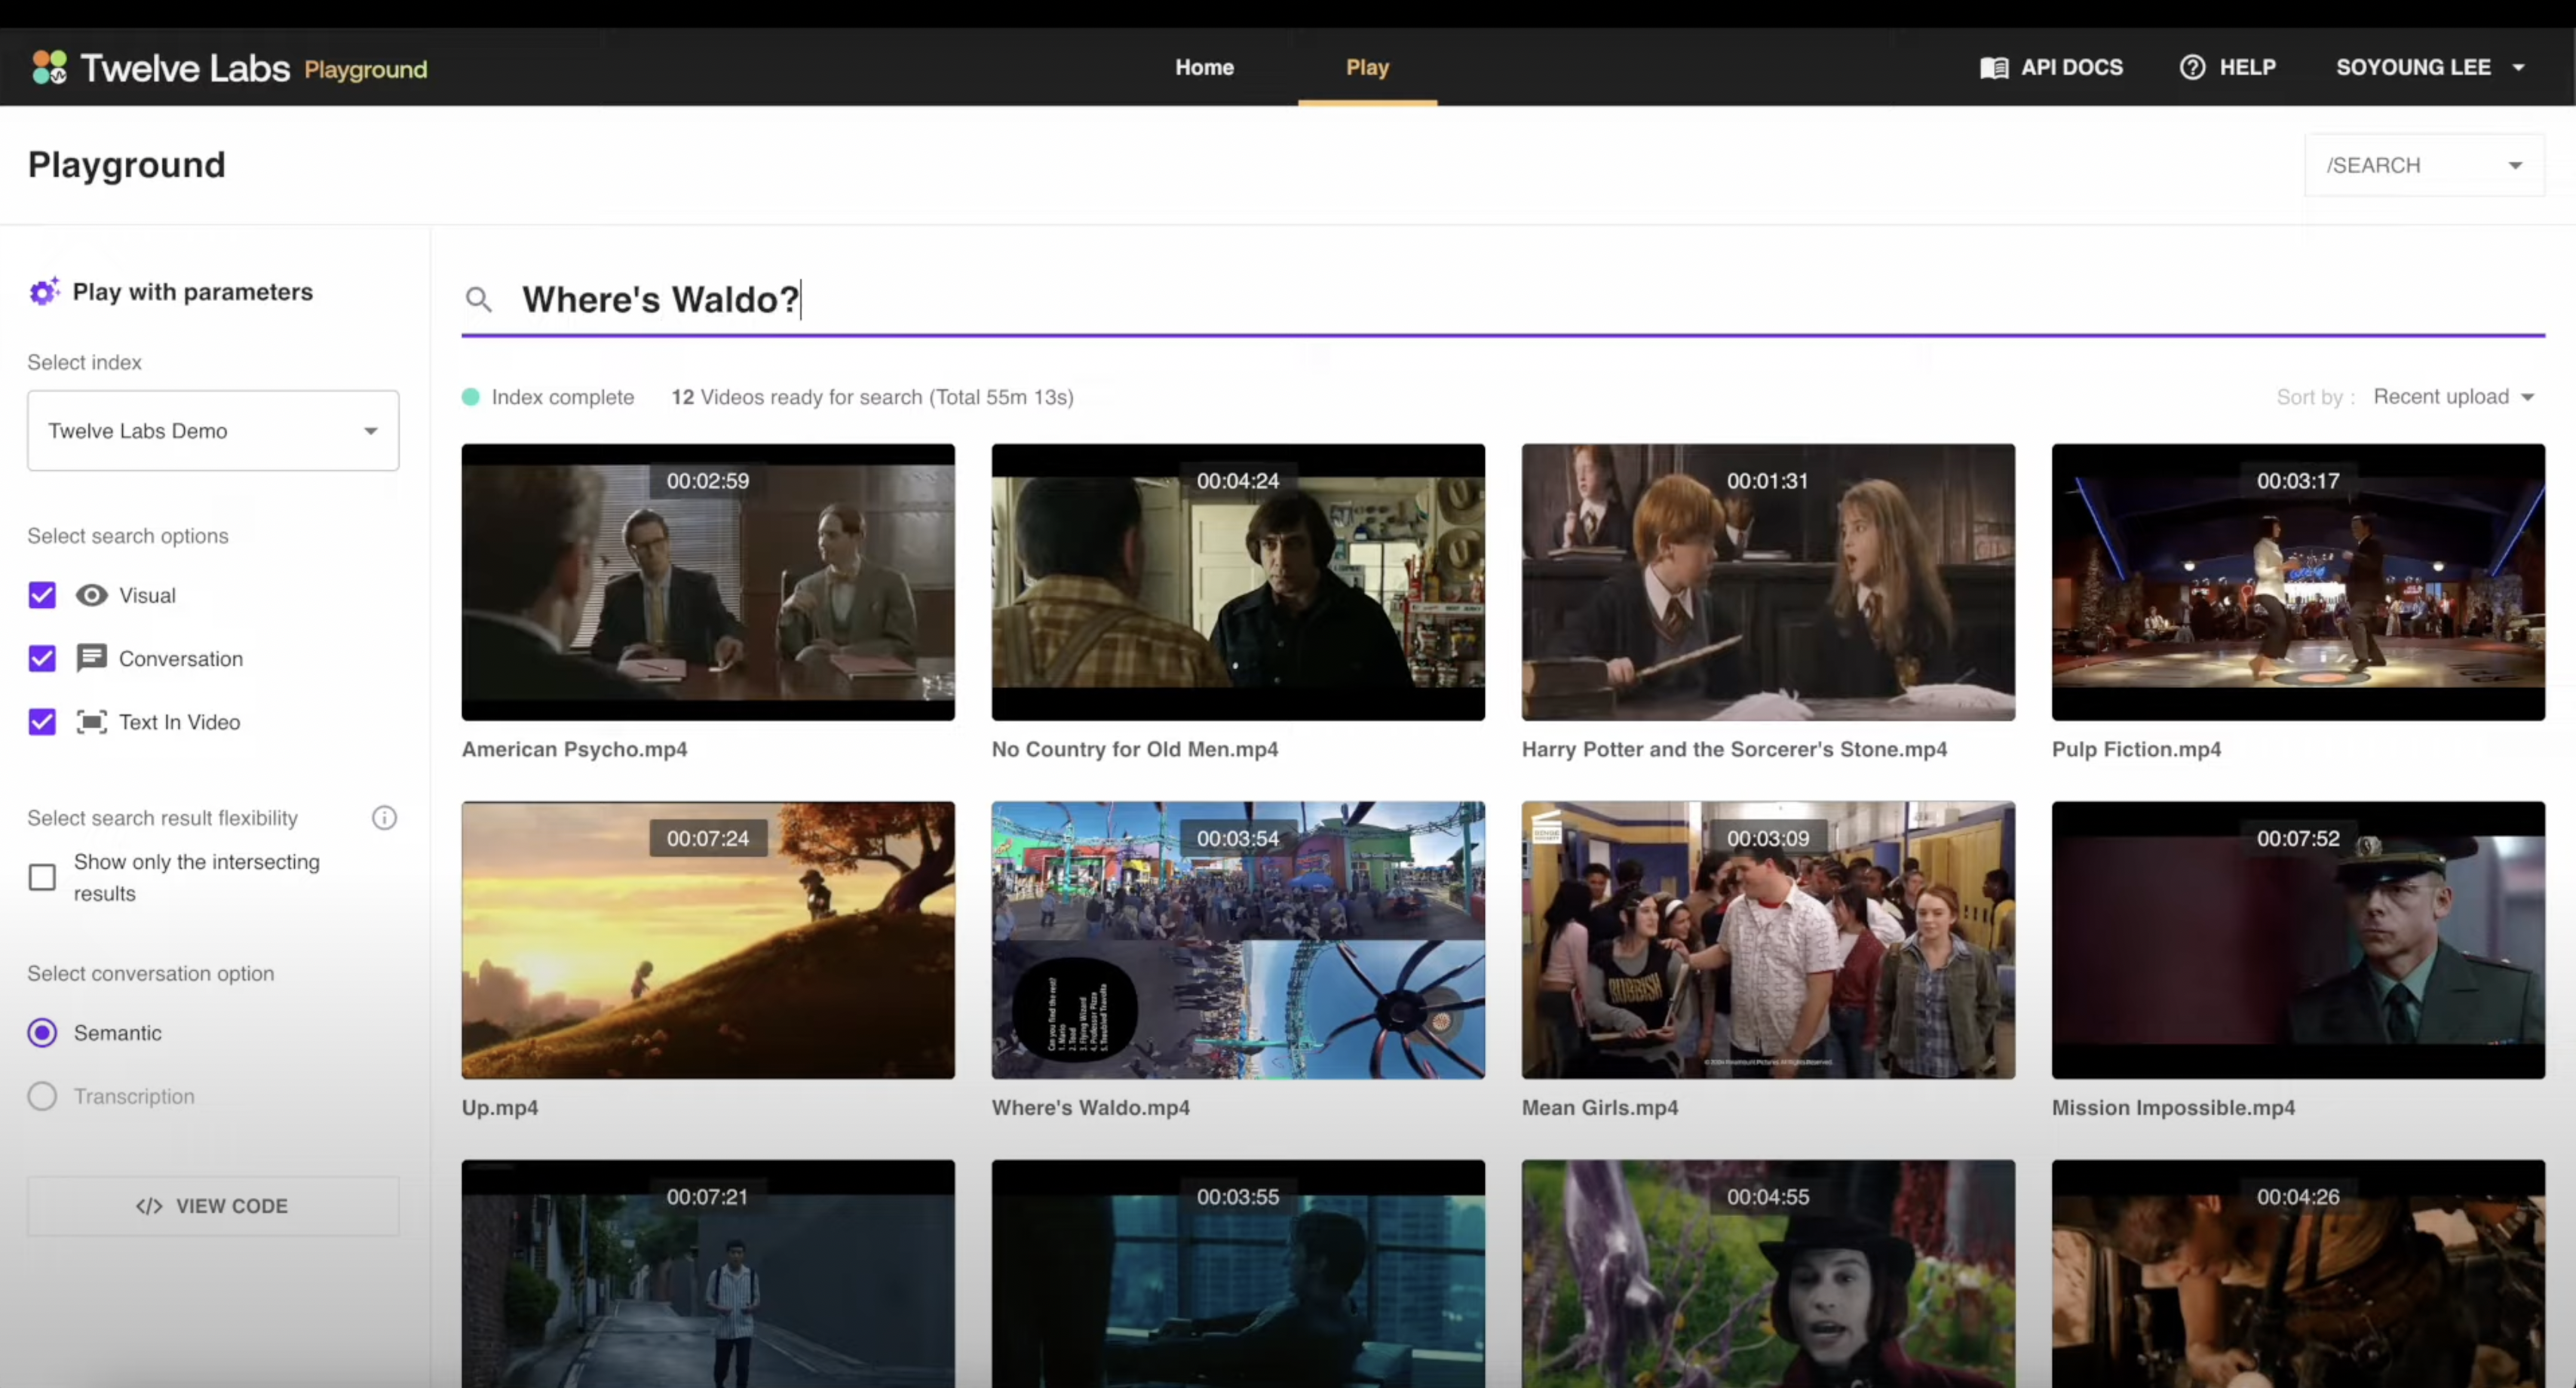 Twelve Labs has built an AI cloud service that helps in video search and understanding